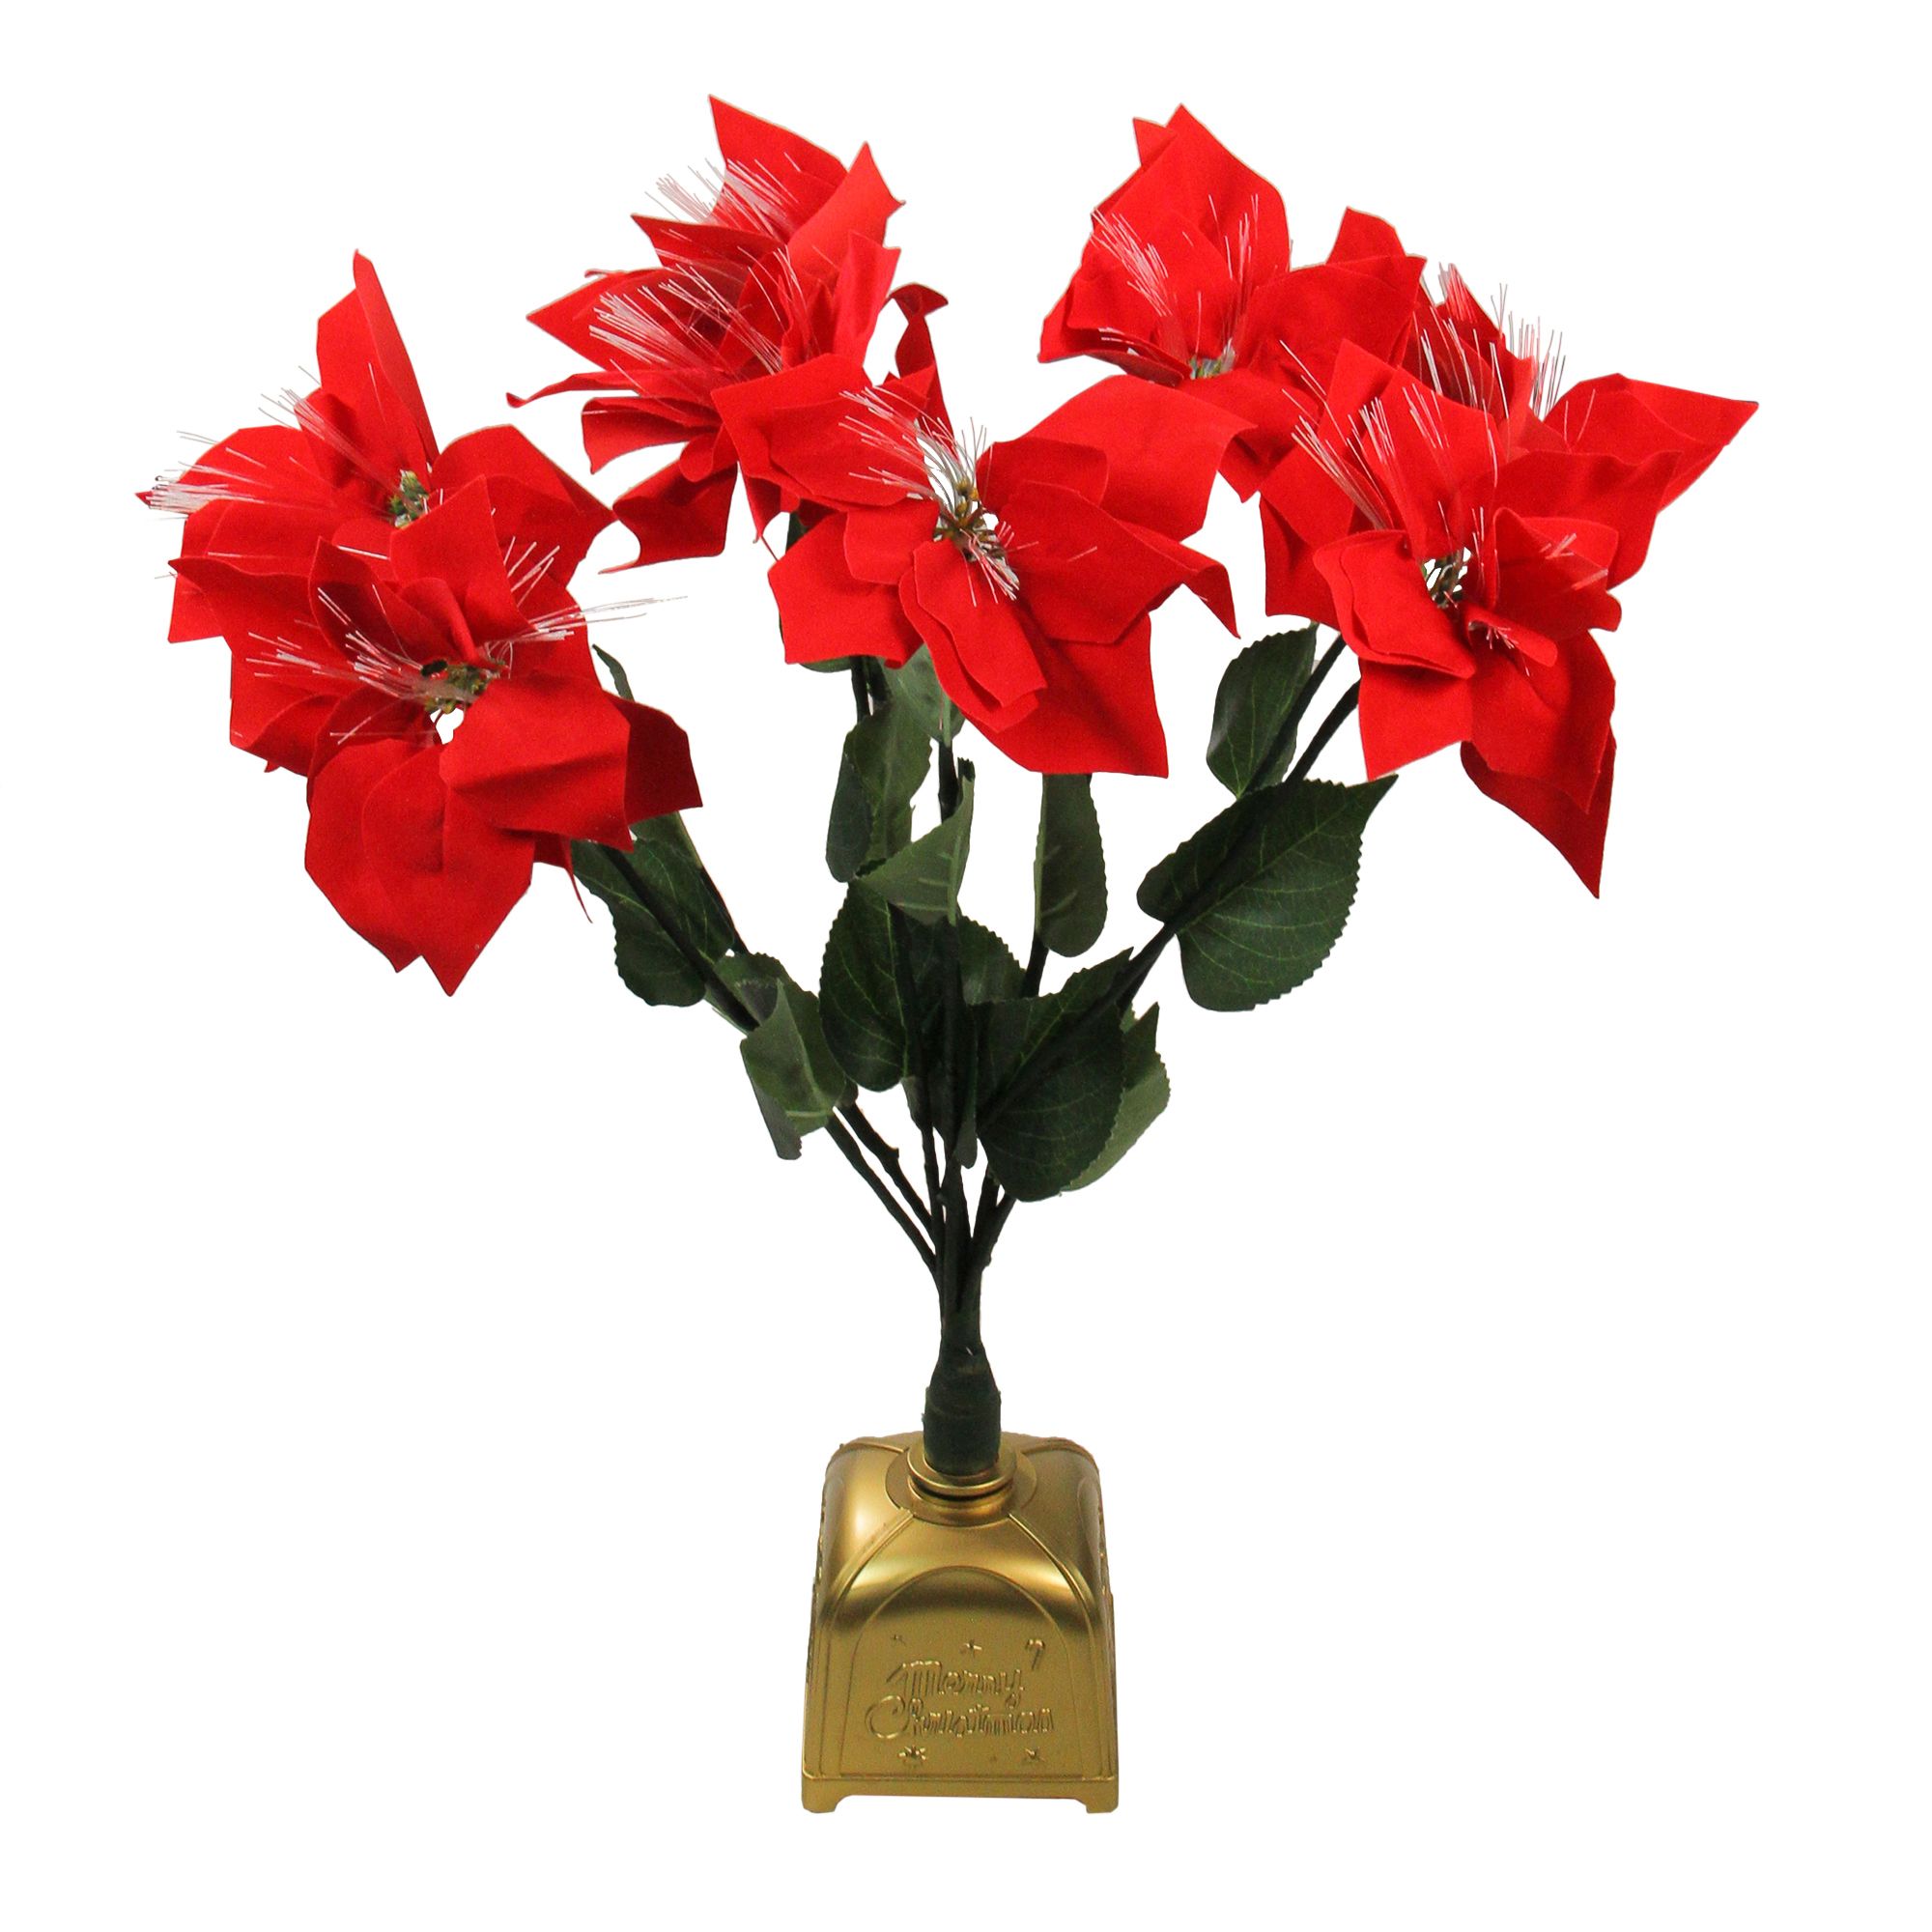 Northlight 20 Pre-Lit Fiber Optic Poinsettia Artificial Christmas Plant -  Red and Green